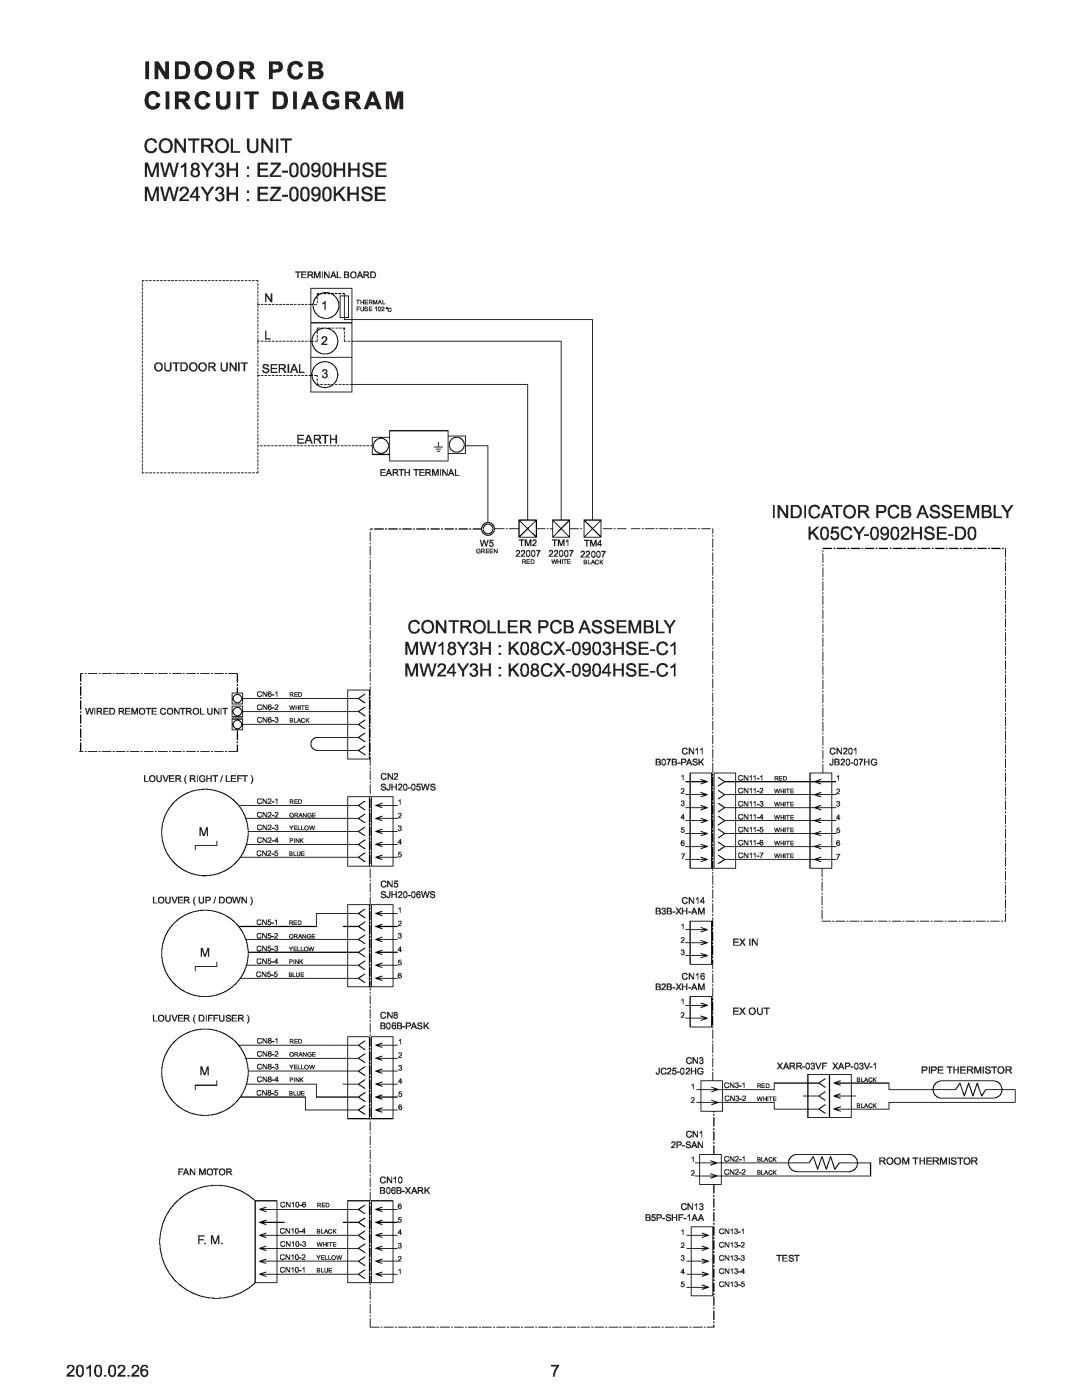 Friedrich MW24Y3H Indoor Pcb Circuit Diagram, INDICATOR PCB ASSEMBLY K05CY-0902HSE-D0, Controller Pcb Assembly, 2010.02.26 